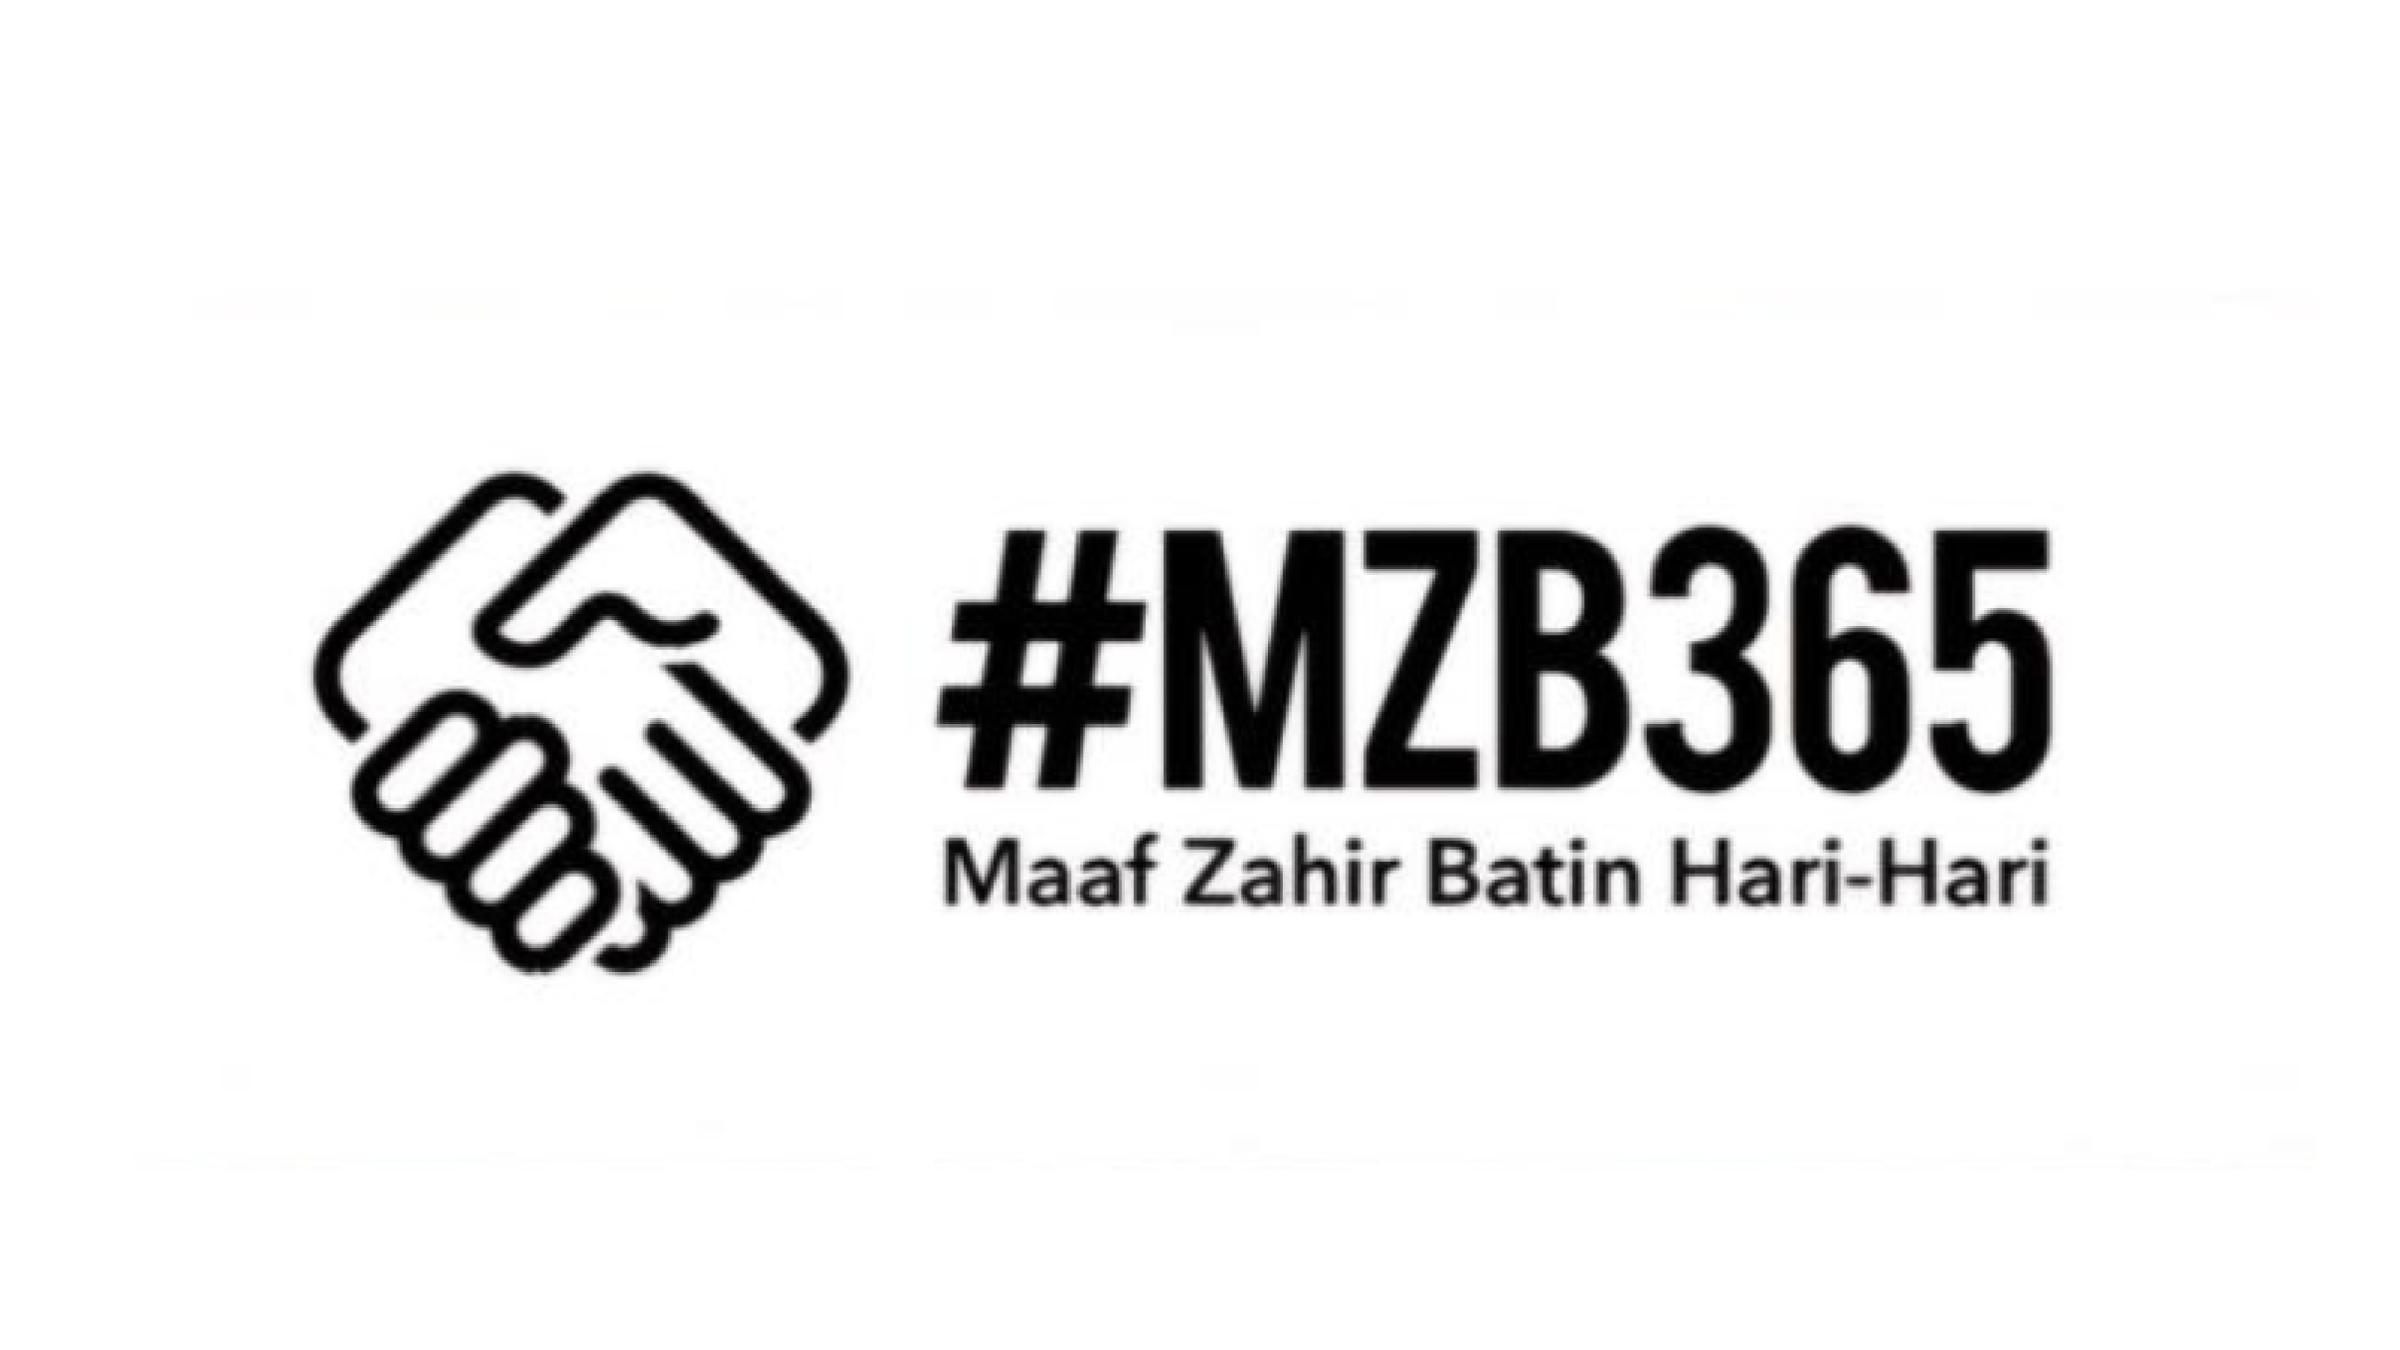 Easing racial, religious tensions: groups launch #MZB365 campaign for national reconciliation